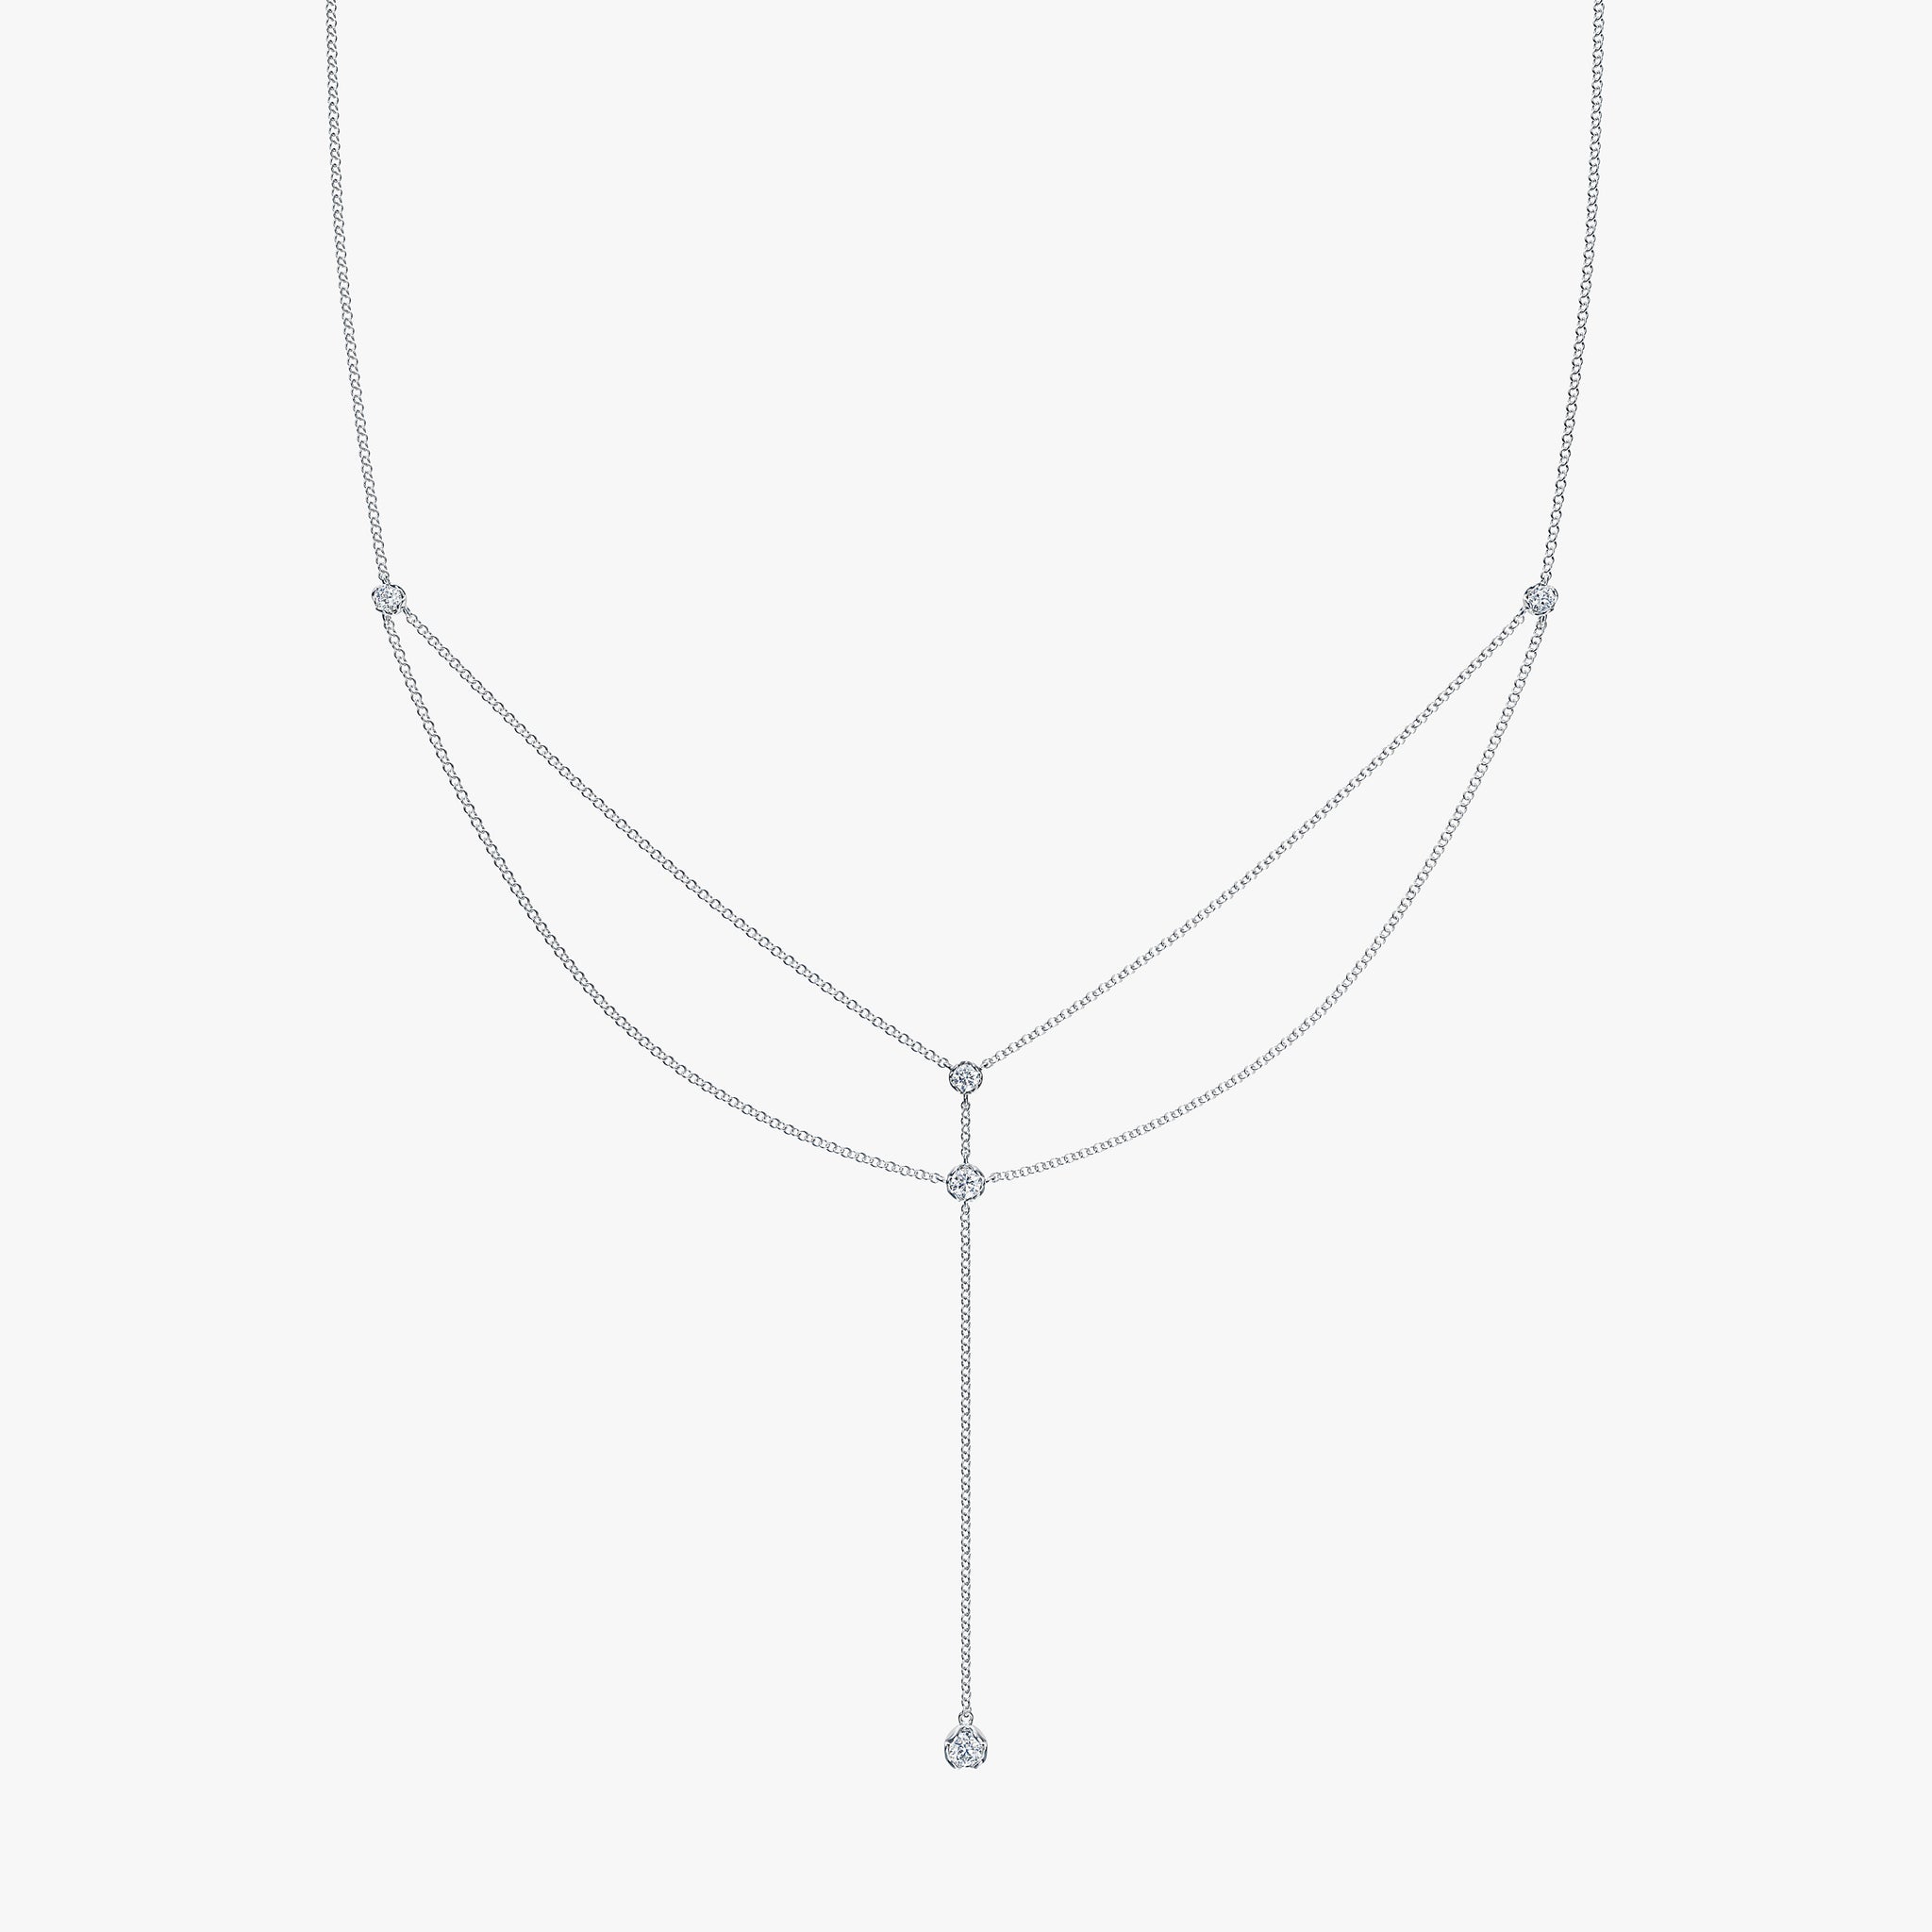 J'EVAR 14KT White Gold Double-Layered Lariat ALTR Lab Grown Diamond Necklace Front View